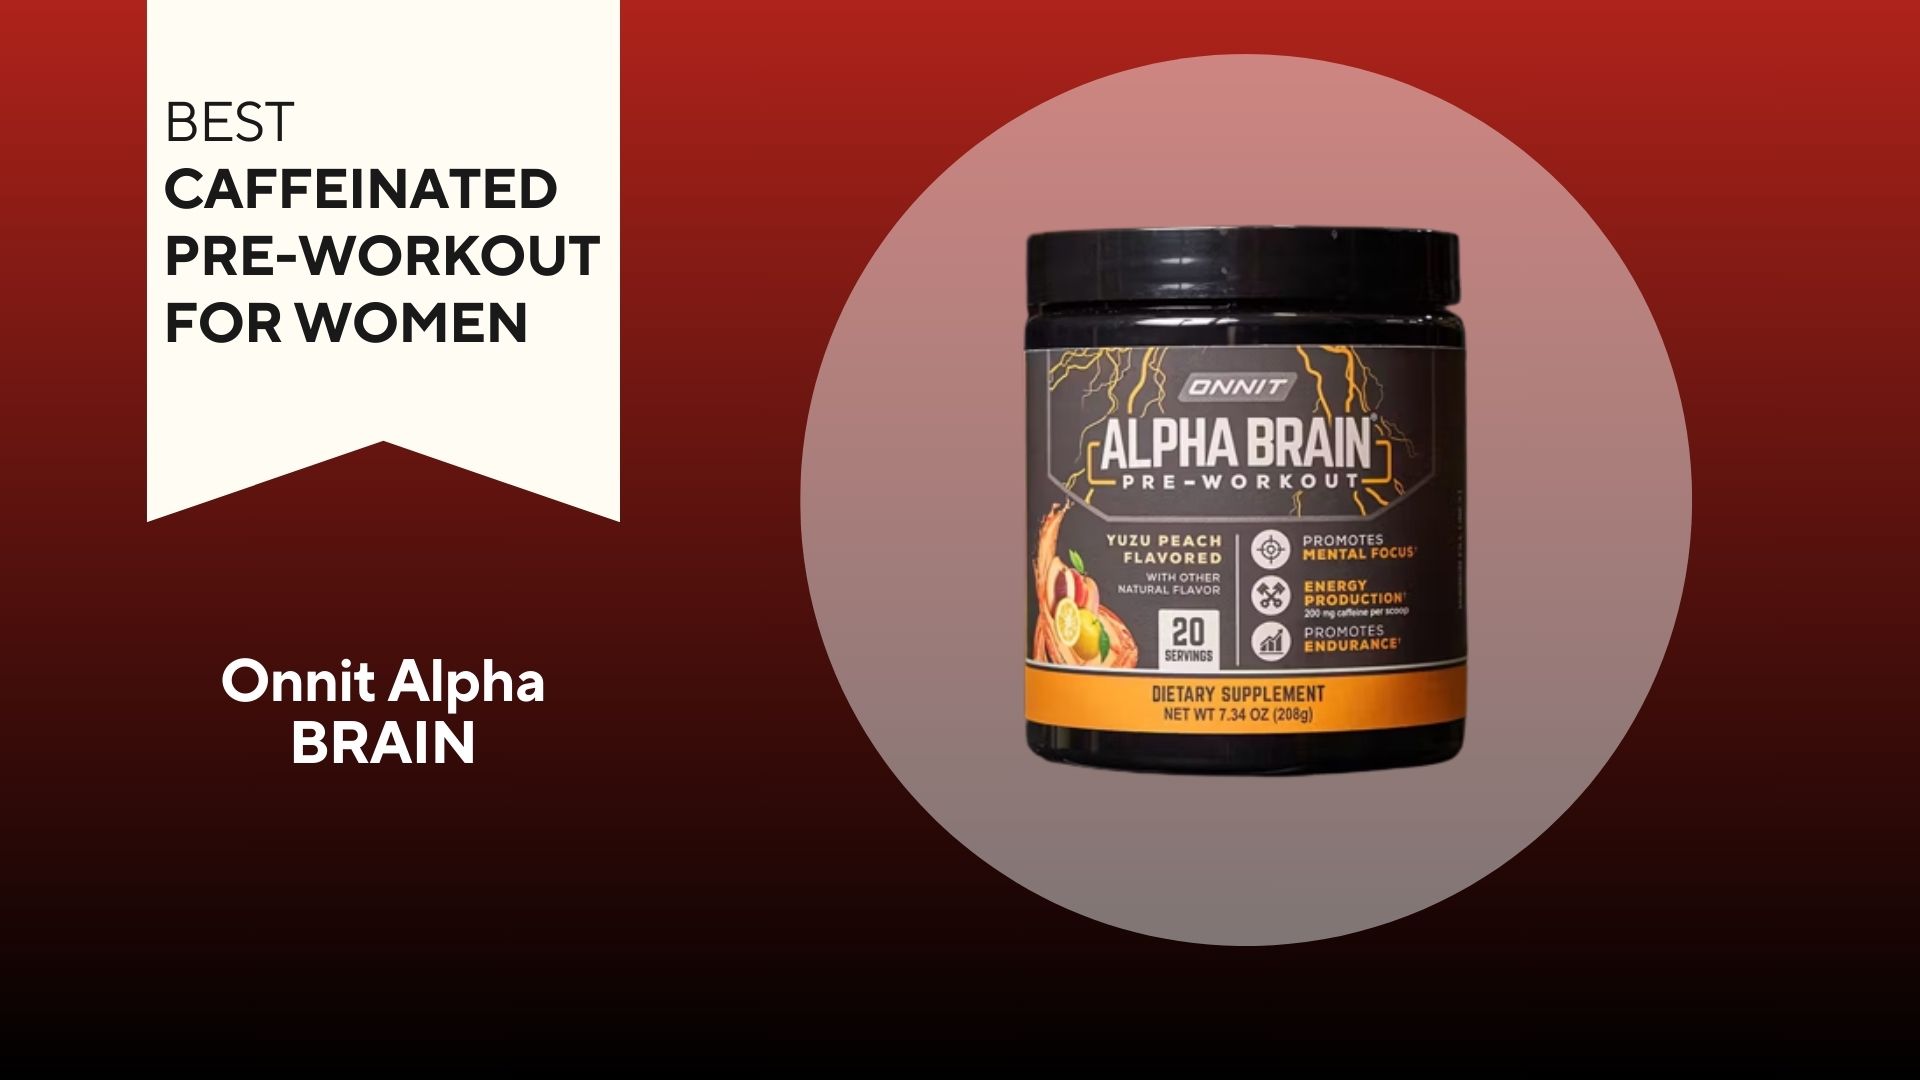 A red background with a white banner that says, "Best Caffeinated Pre-Workout for Women" next to a black and orange container that says Onnit Alpha Brain Pre-Workout in white font